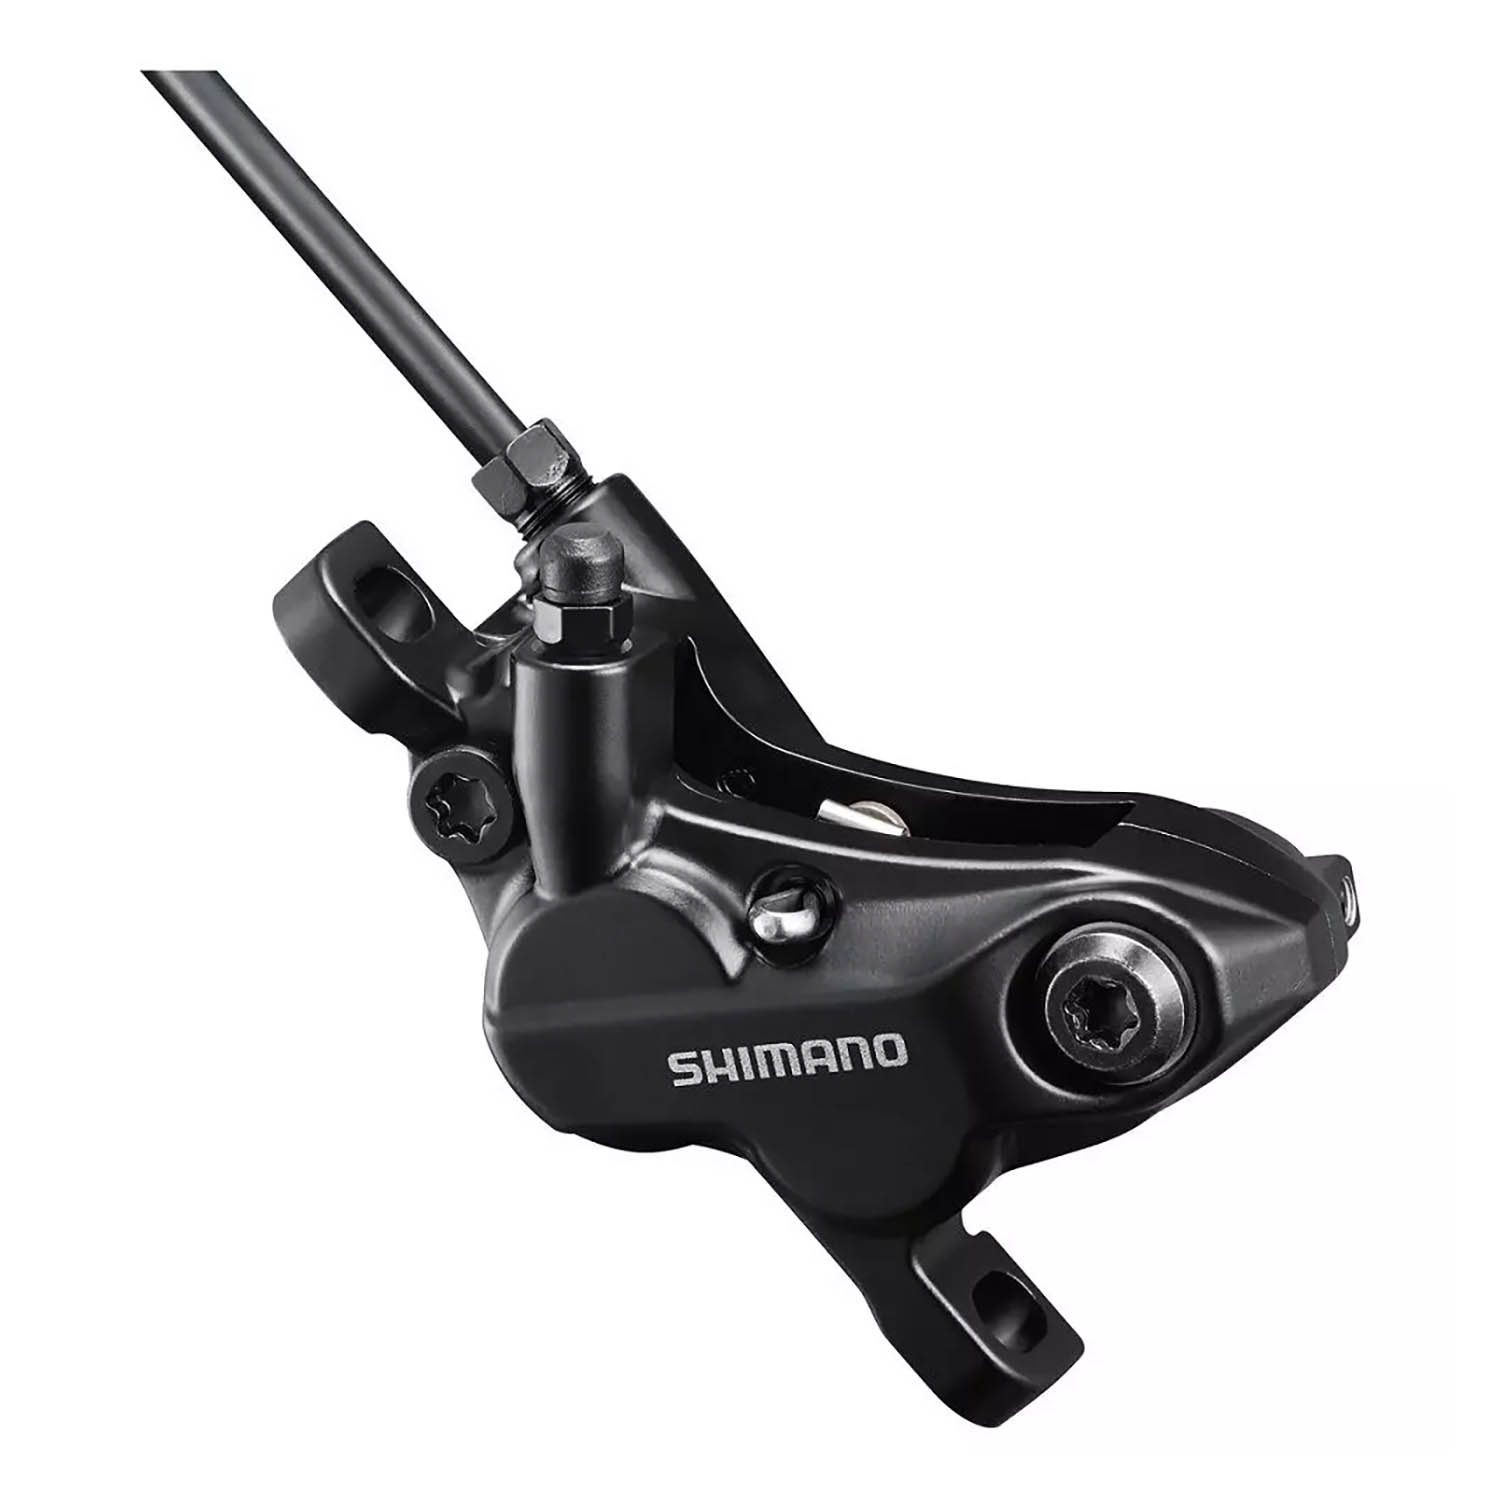 Shimano remklauw BR-MT520 (Deore)